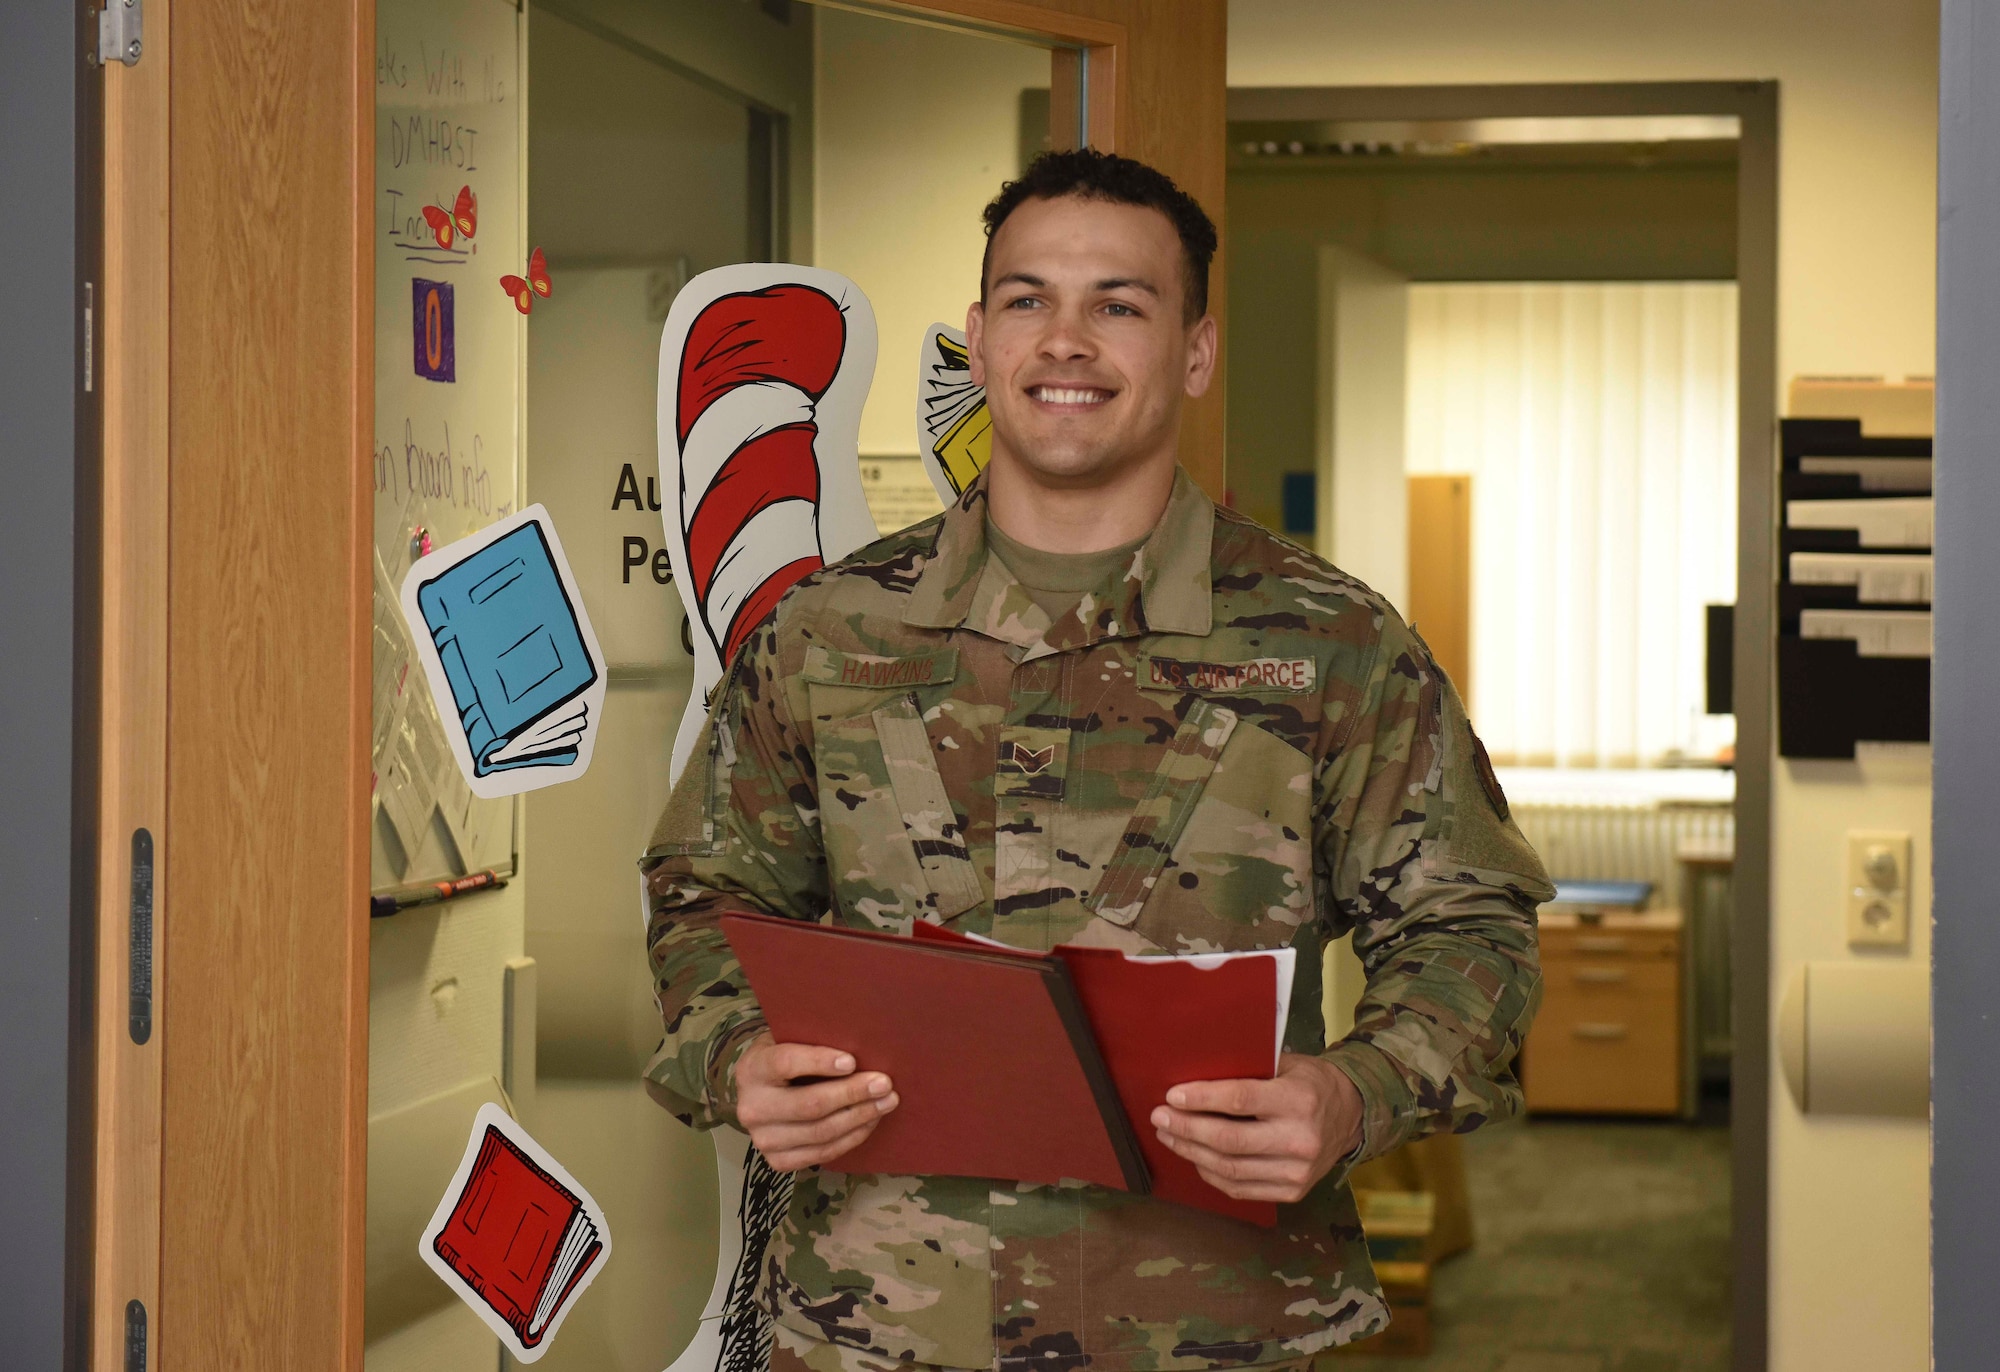 U.S. Air Force Senior Airman David Hawkins, 86th Medical Operations Squadron pediatric medical technician, works at the Pediatric Developmental Clinic at Ramstein Air Base, Germany, Feb. 21, 2020. Hawkins volunteers around Ramstein, teaching Airmen how to achieve better fitness and nutrition.